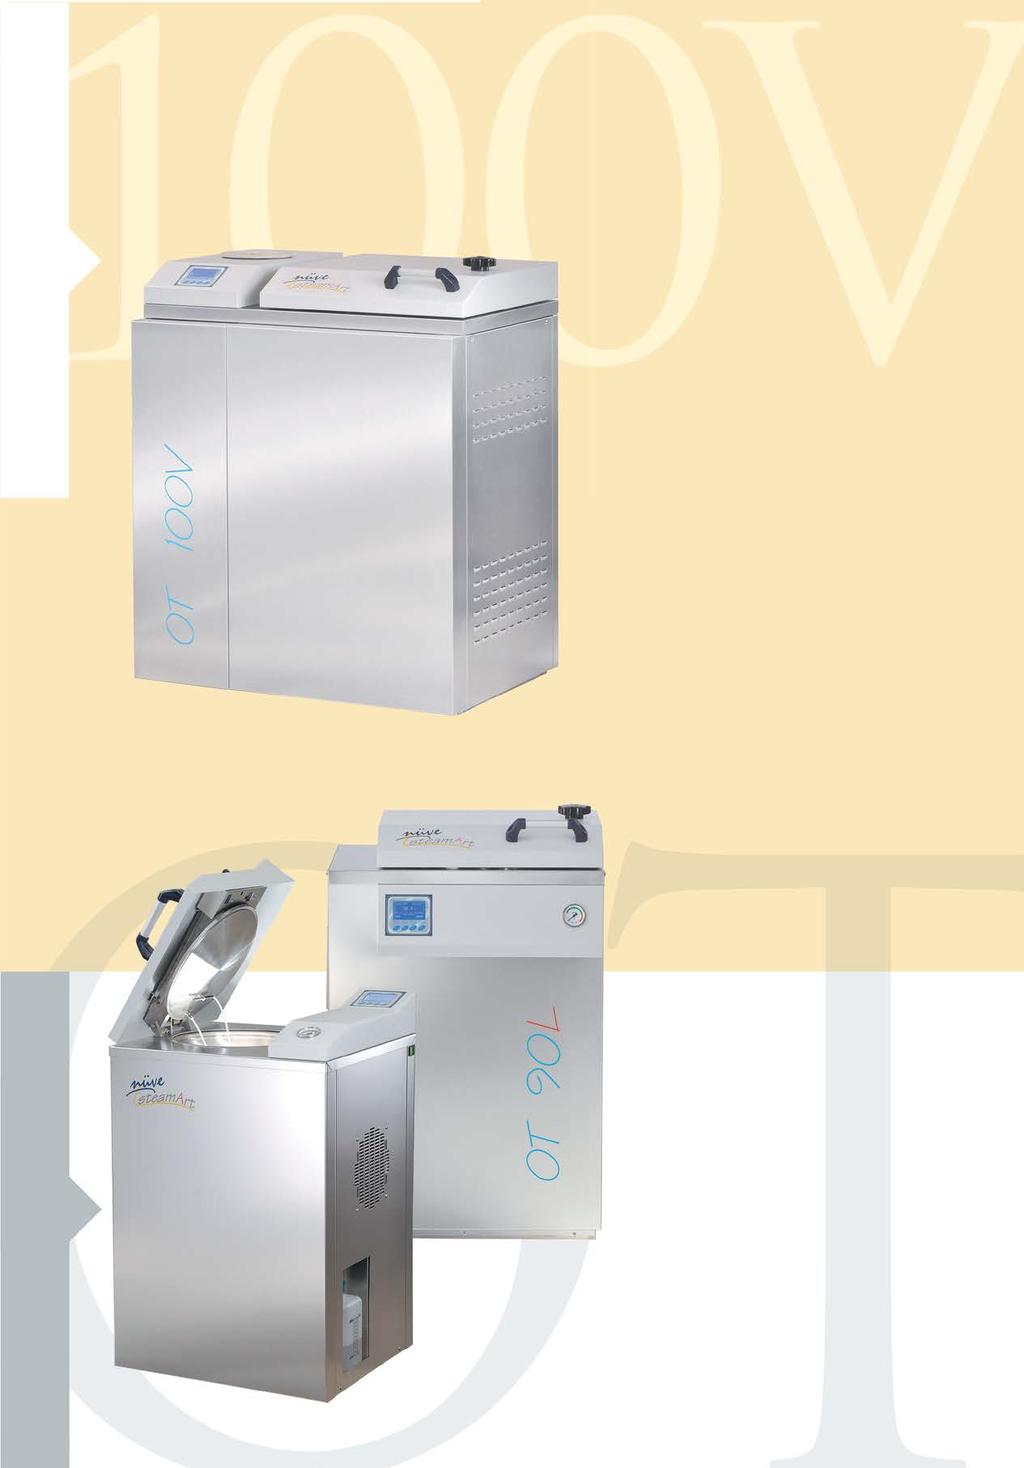 O T 4 0 L / 9 0 L O T 1 0 0 V OT 100V VERTICAL STEAM STERILIZER Chamber volume : 100 liters Advanced technology for the sterilization of textile; wrapped or packed materials; glass and liquid Fully